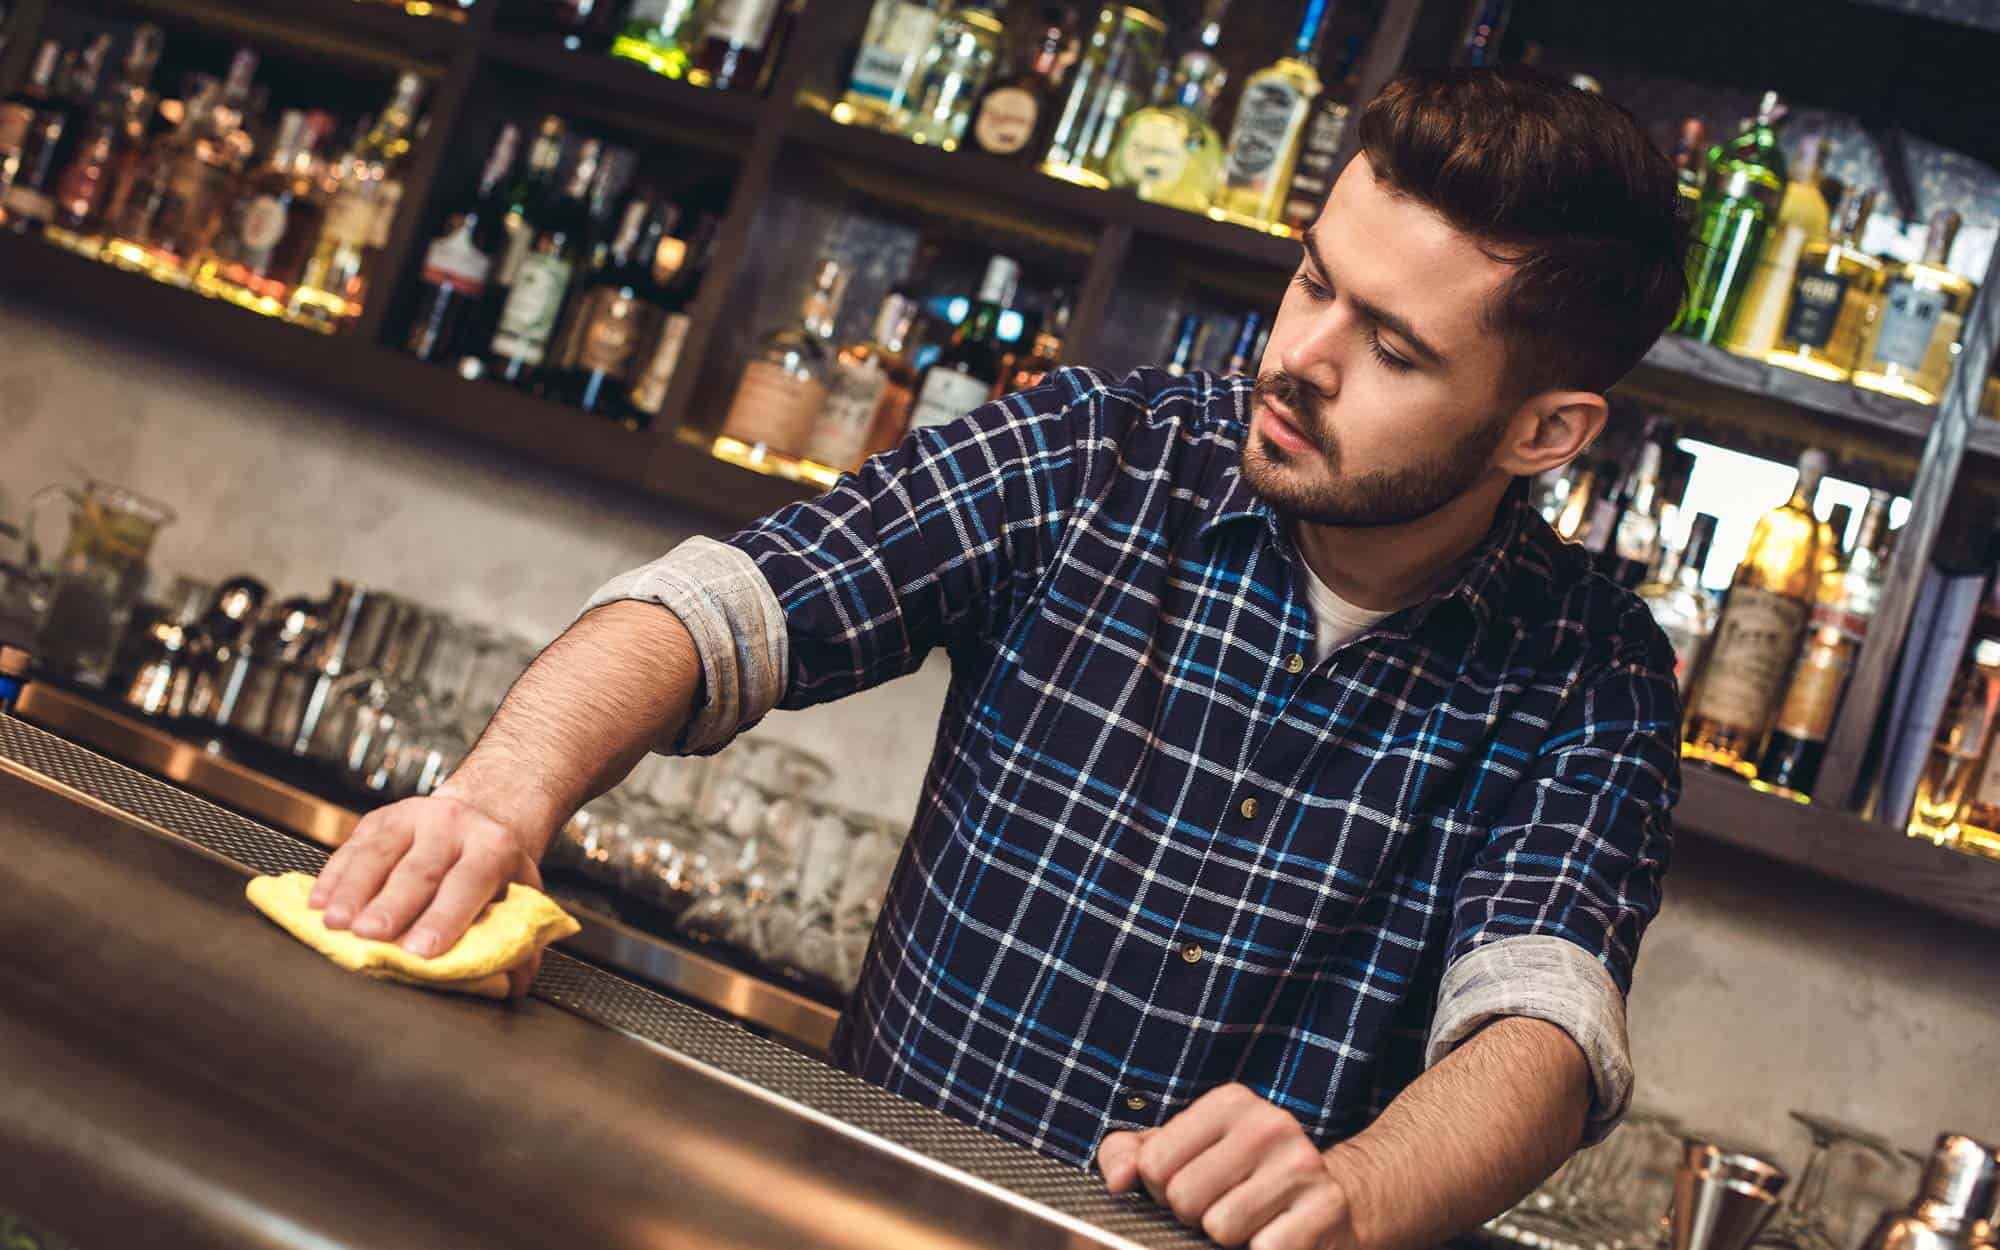 Young bartender standing at bar counter wiping surface concentrated